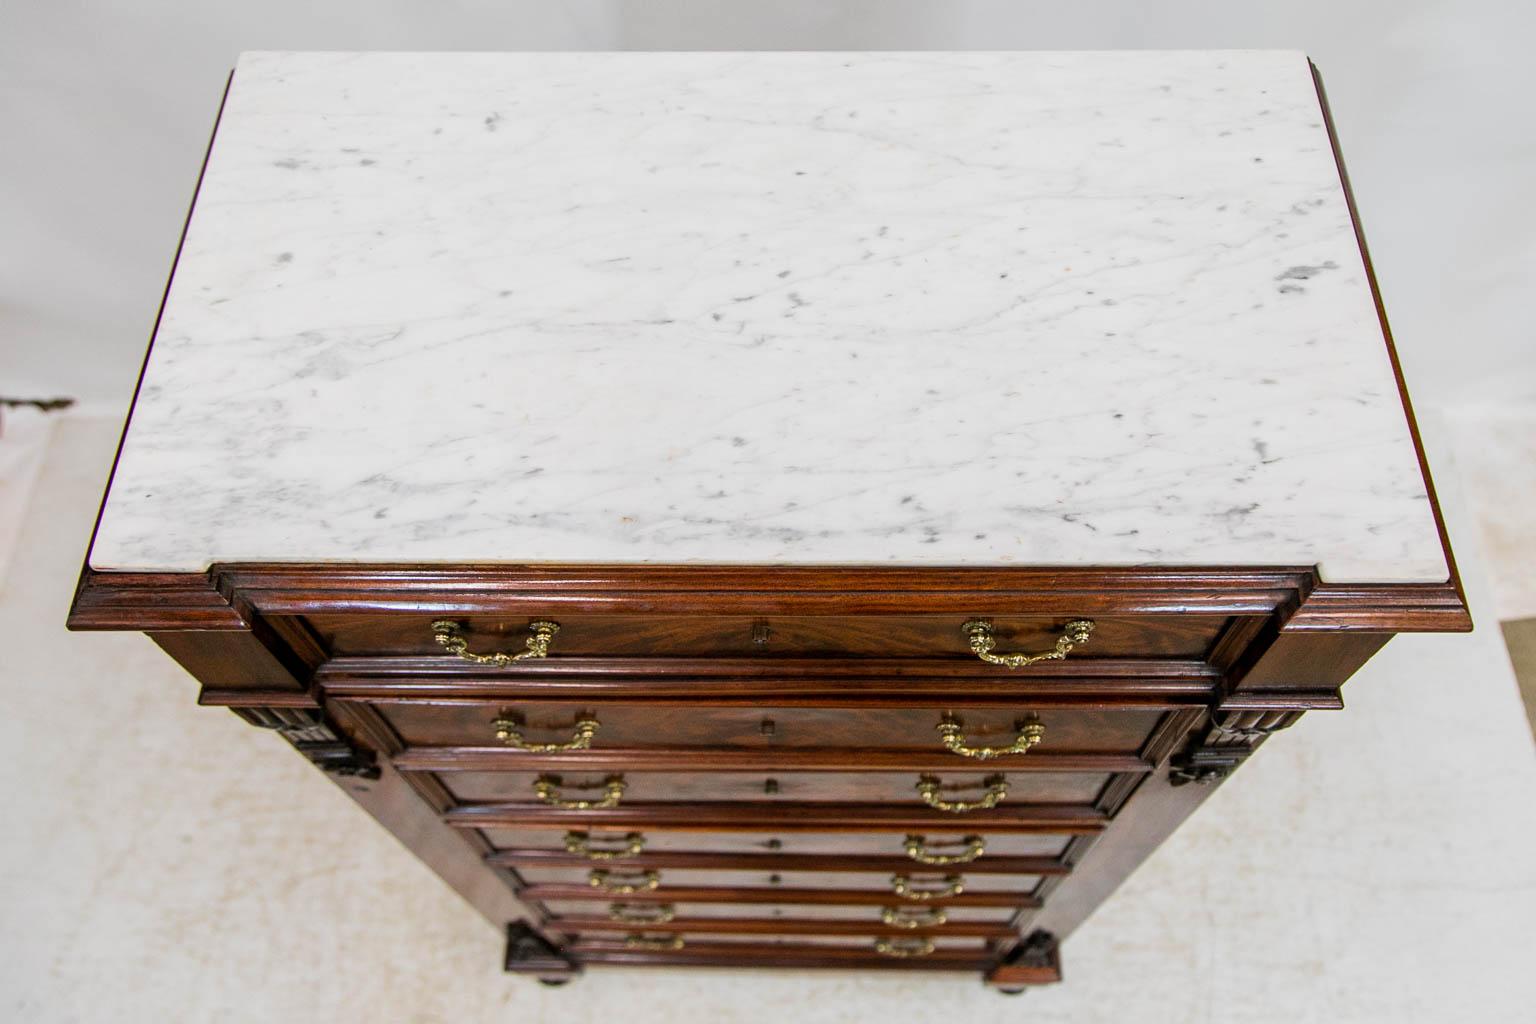 This mahogany lingerie chest has a shaped marble top that is white with light gray veining. The seven drawers have flame grained bookmatched mahogany fronts. All the drawers have working locks with the original keys. The drawers are framed with